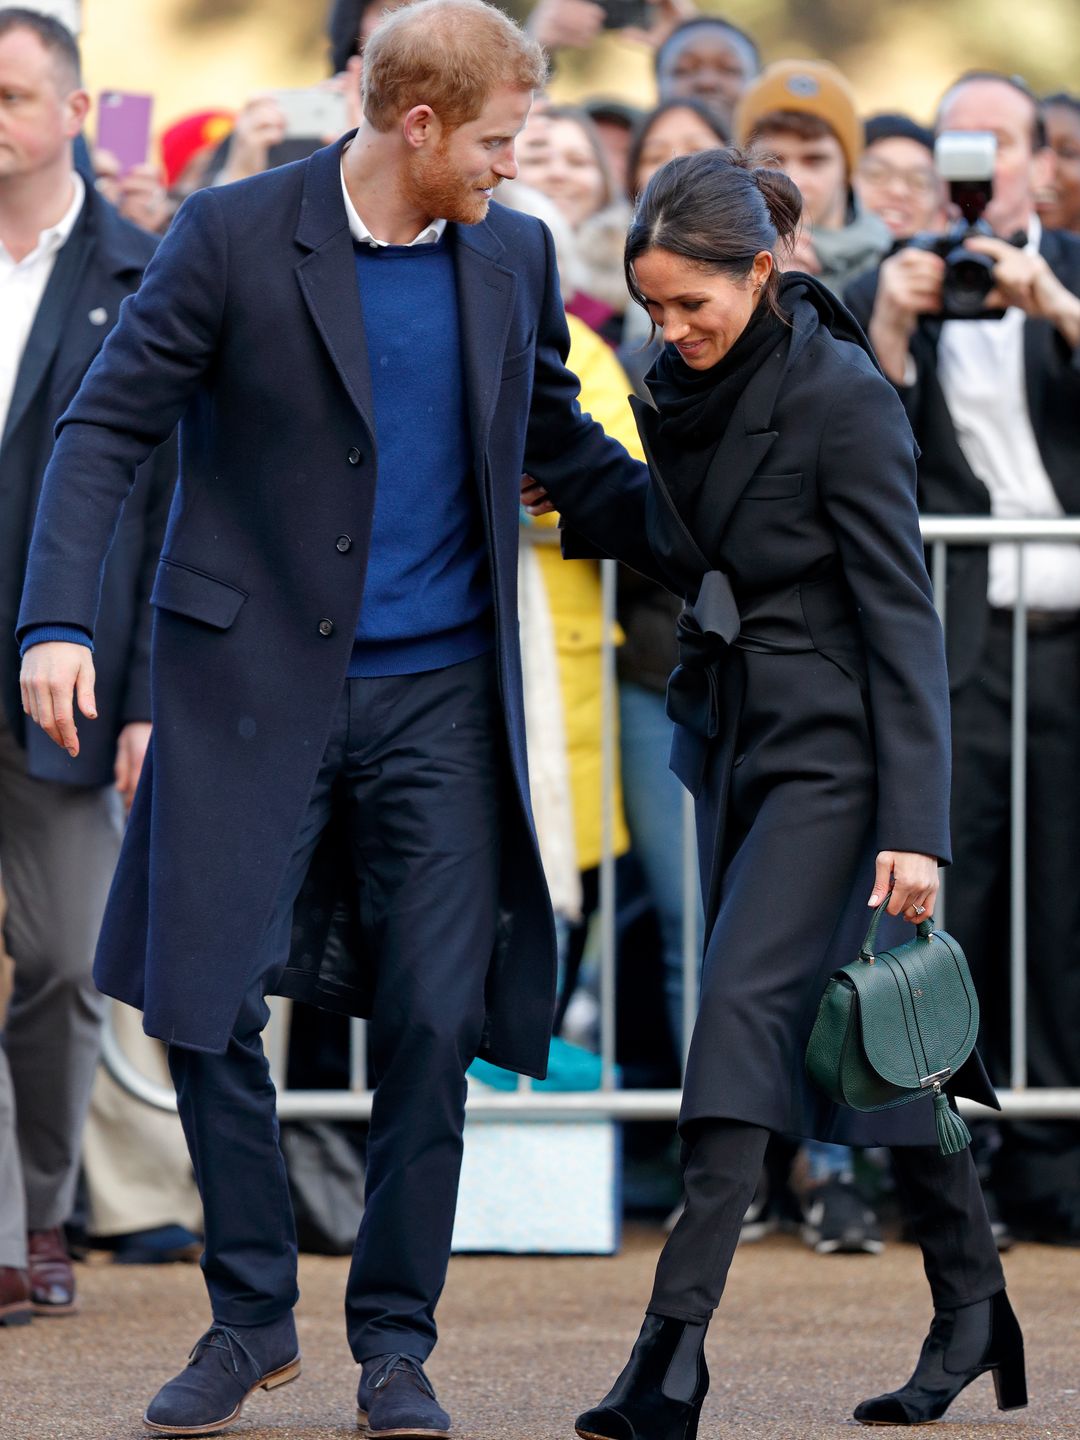 Meghan Markle wore the DeMellier bag to visit Cardiff Castle